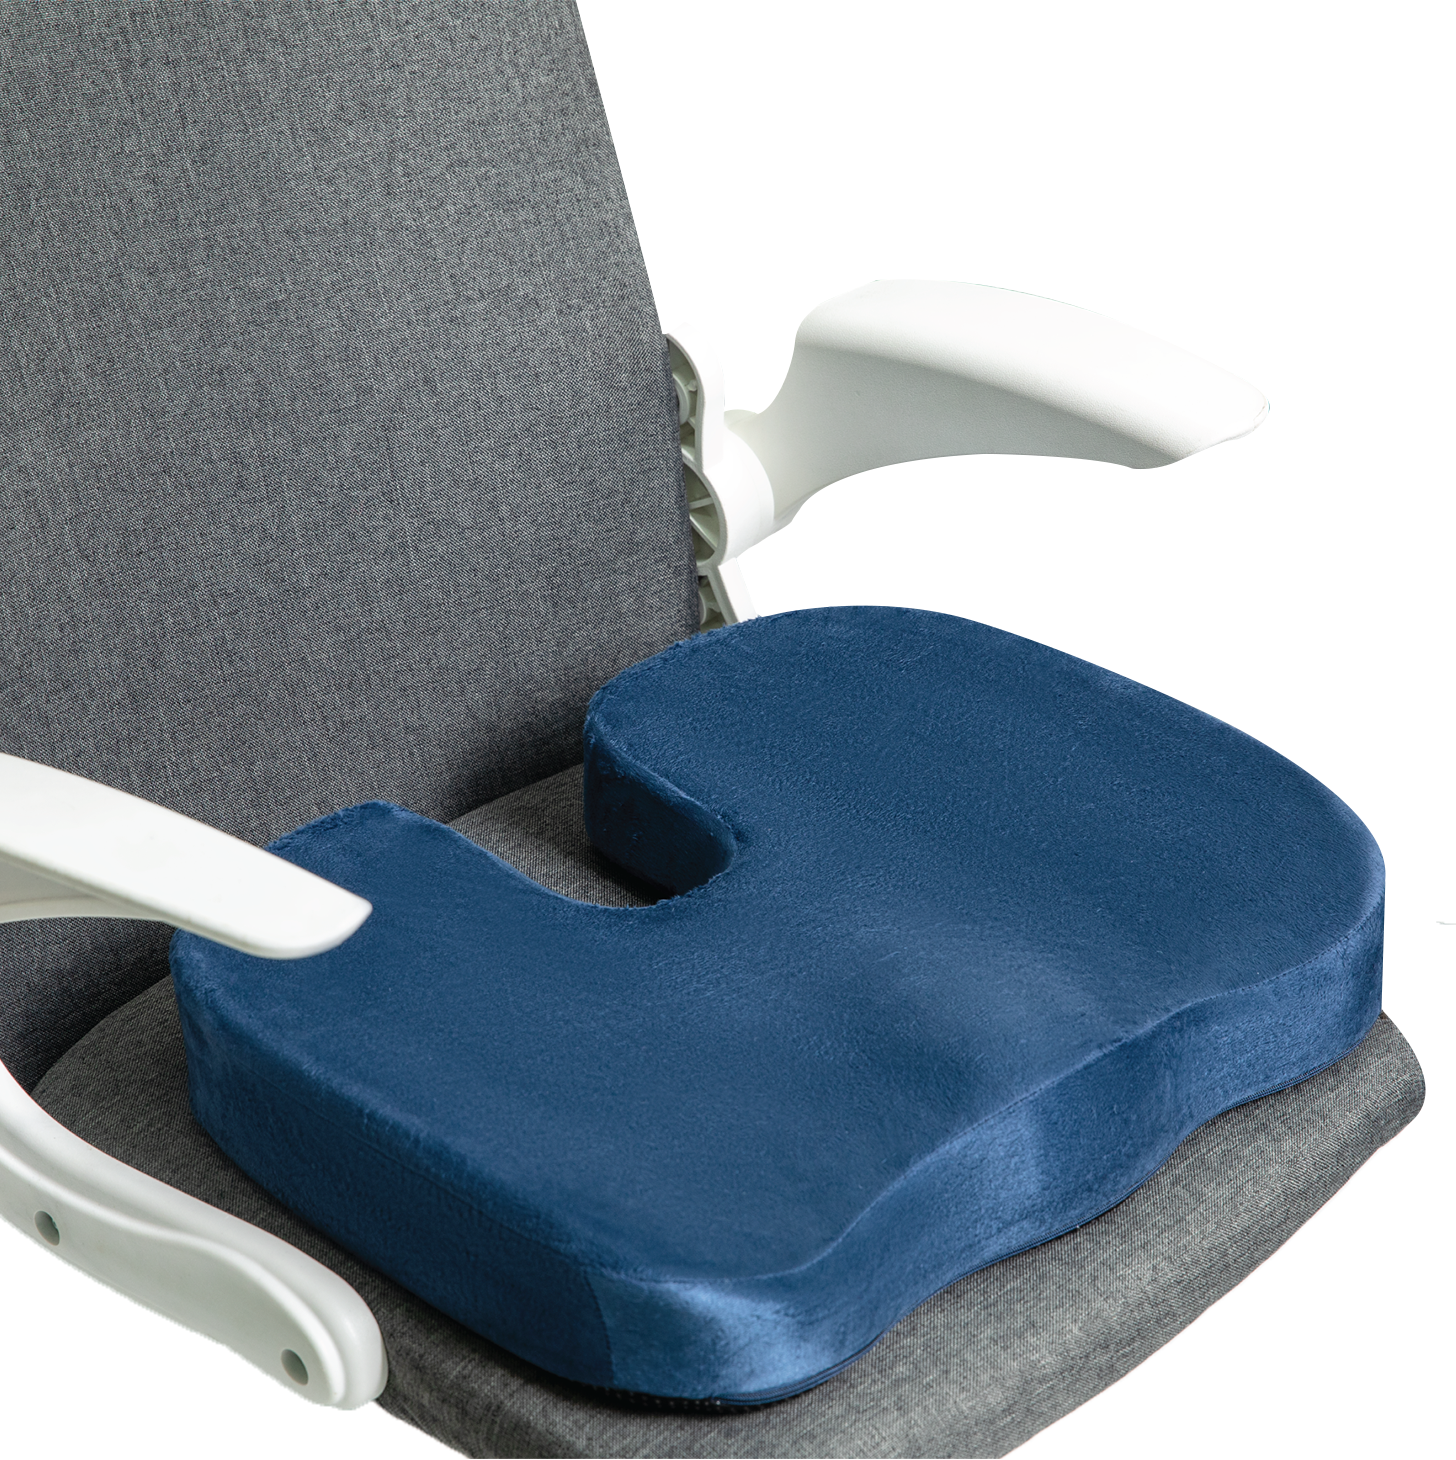 Soft Memory Foam Seat Cushion For Office Chair - Bedding4homes